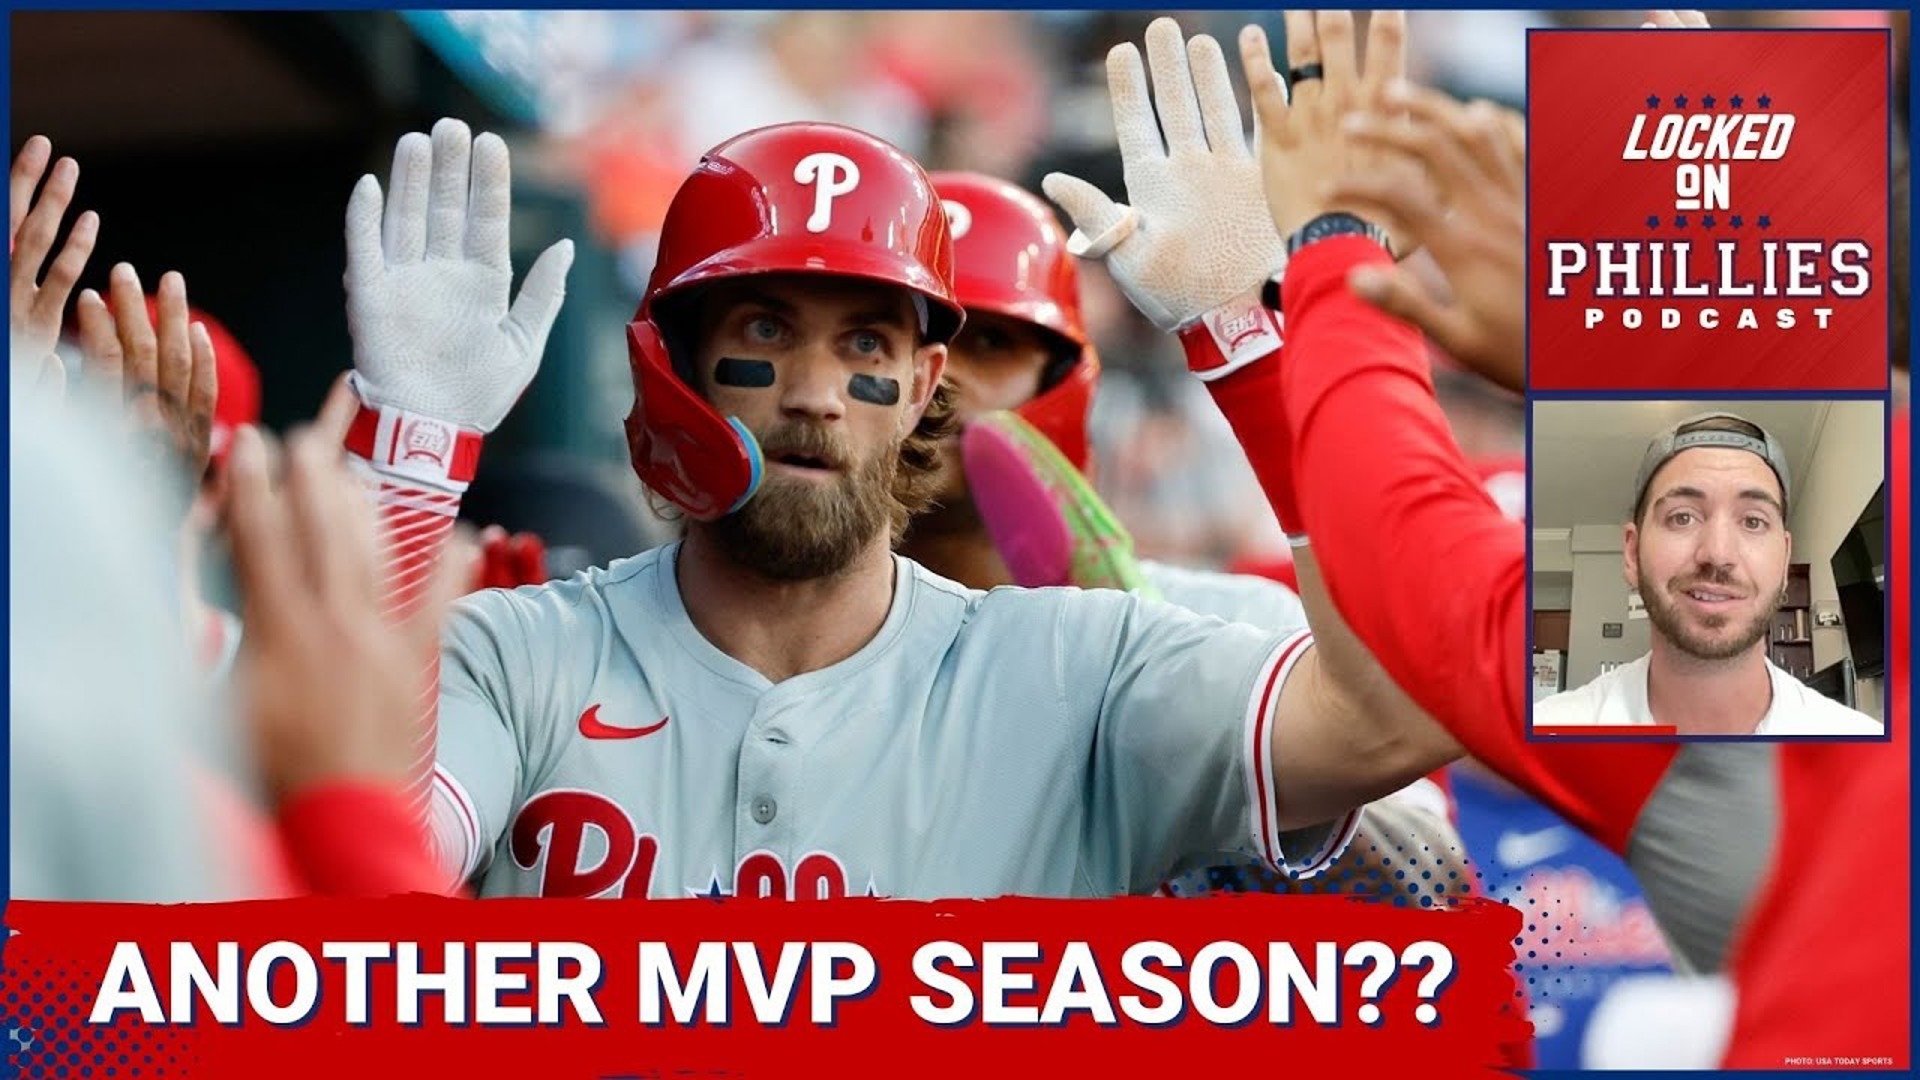 In today's episode, Connor discusses the Philadelphia Phillies' 8-1 win over the Detroit Tigers last night, and specifically the efforts of Bryce Harper.